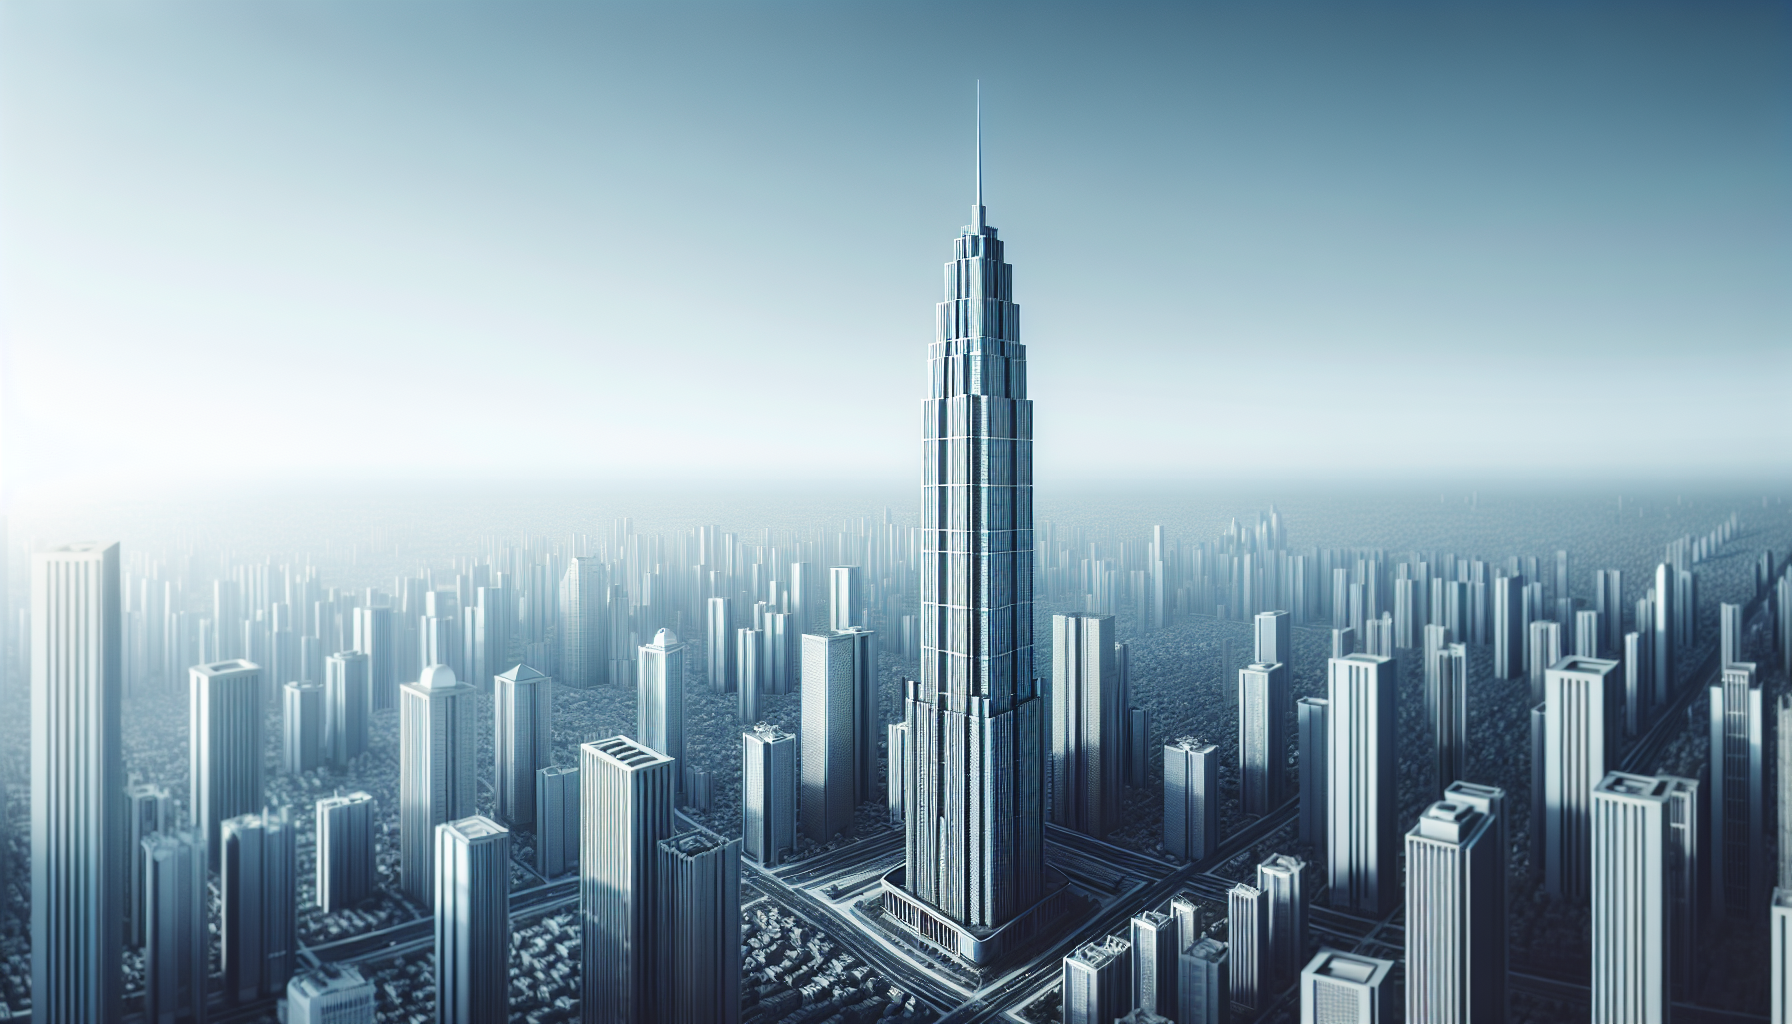 What Is The Tallest Building In The Americas?